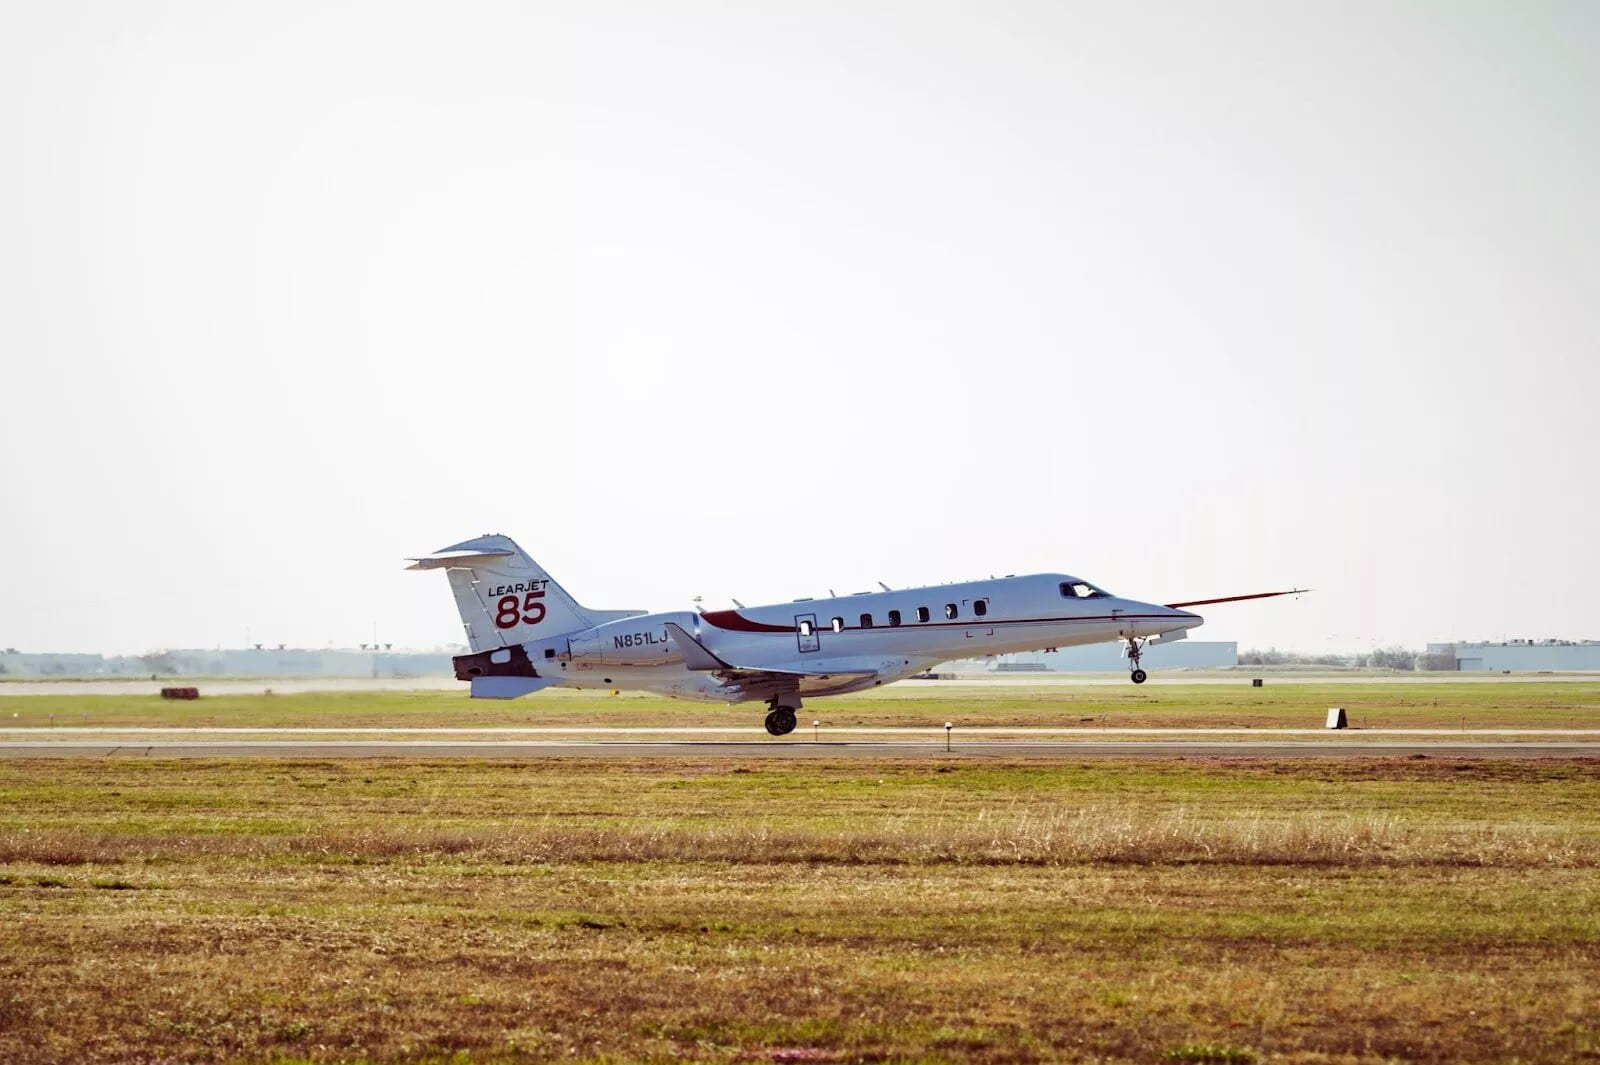 The sleek and sophisticated Bombardier Learjet 85, poised for takeoff, offers passengers a perfect blend of performance, luxury, and cutting-edge technology in the world of private aviation